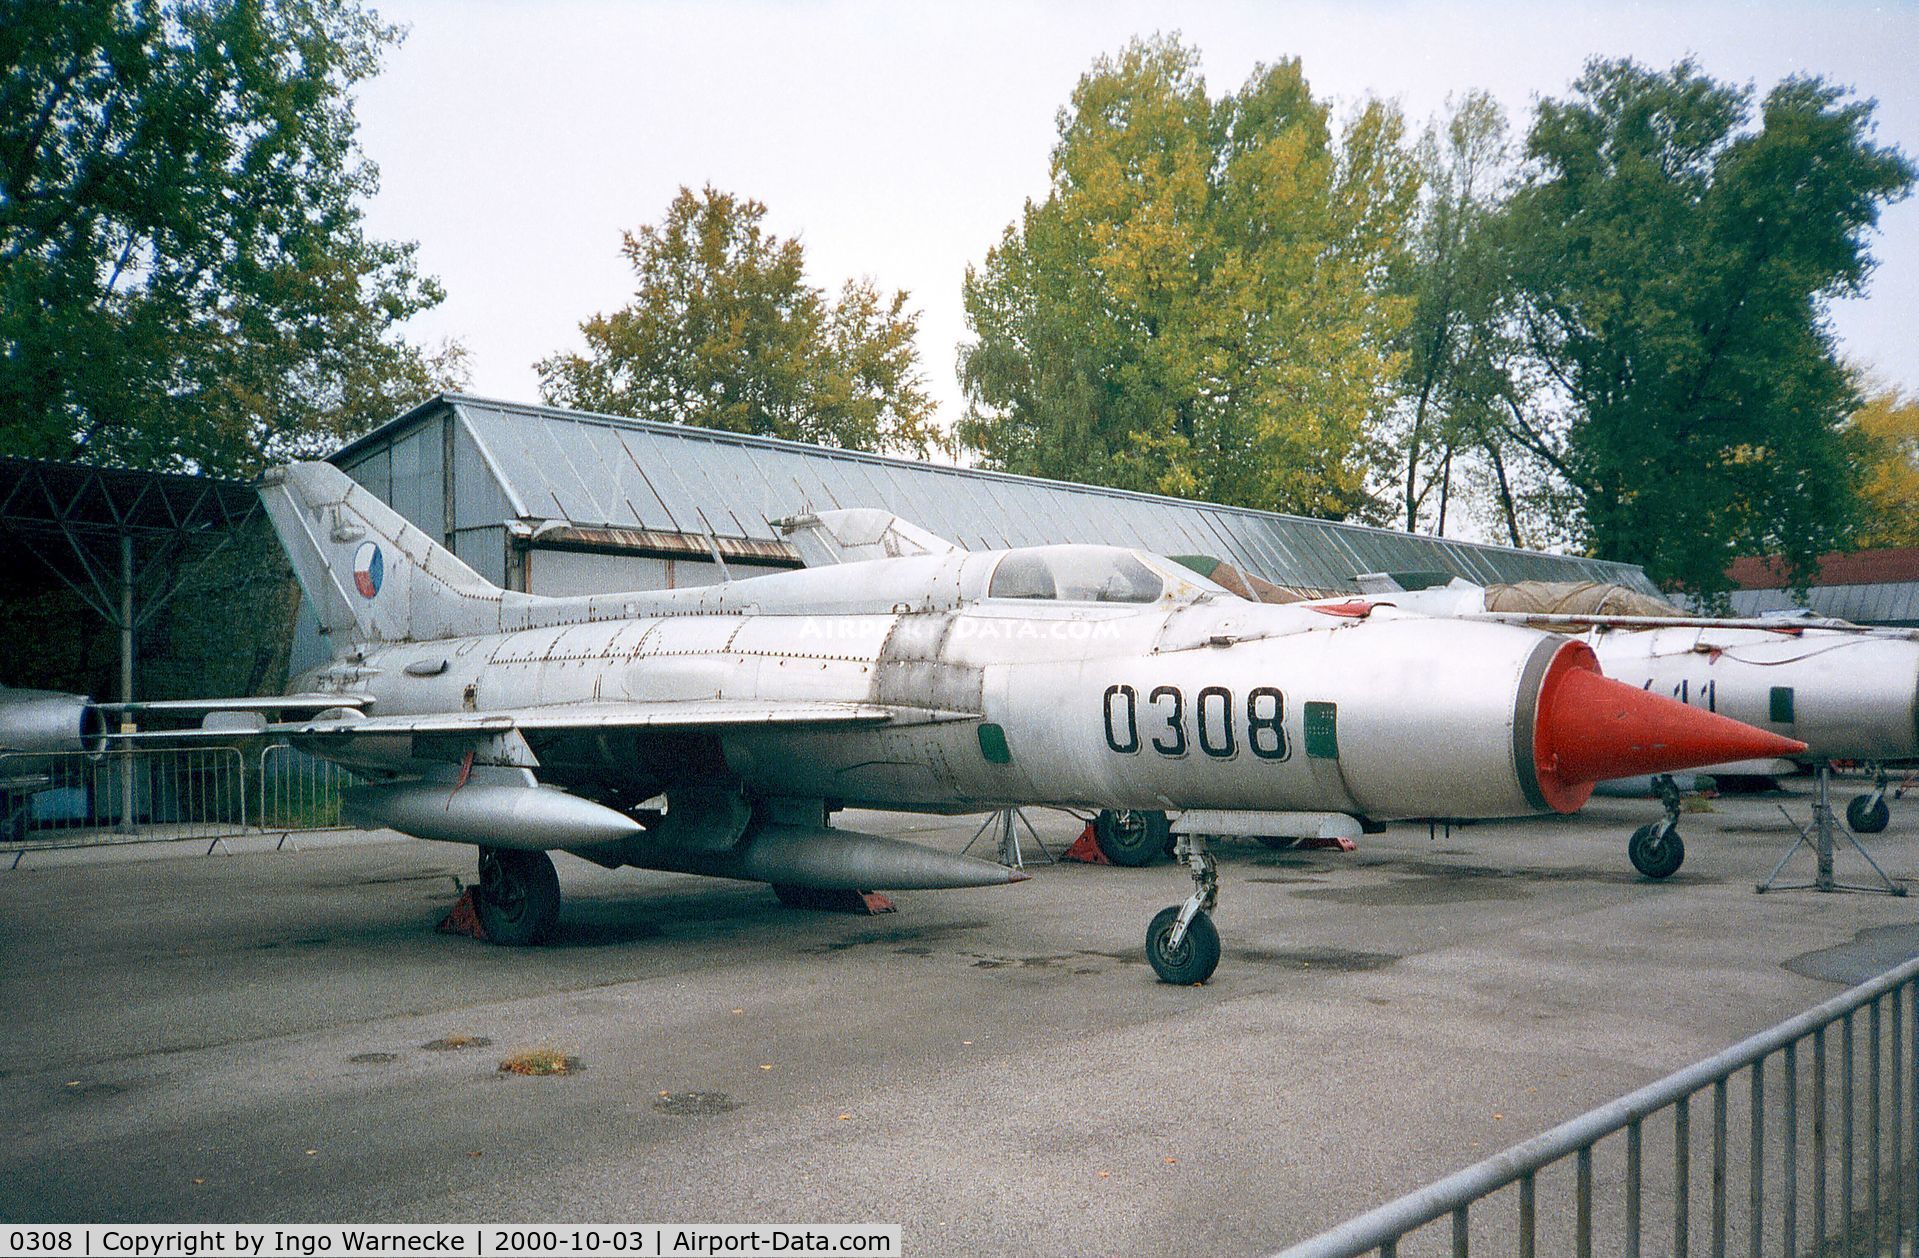 0308, 1964 Mikoyan-Gurevich MiG-21PF C/N 560308, Mikoyan i Gurevich MiG-21PF FISHBED-D of the czechoslovak air force at the Letecke Muzeum, Prague-Kbely